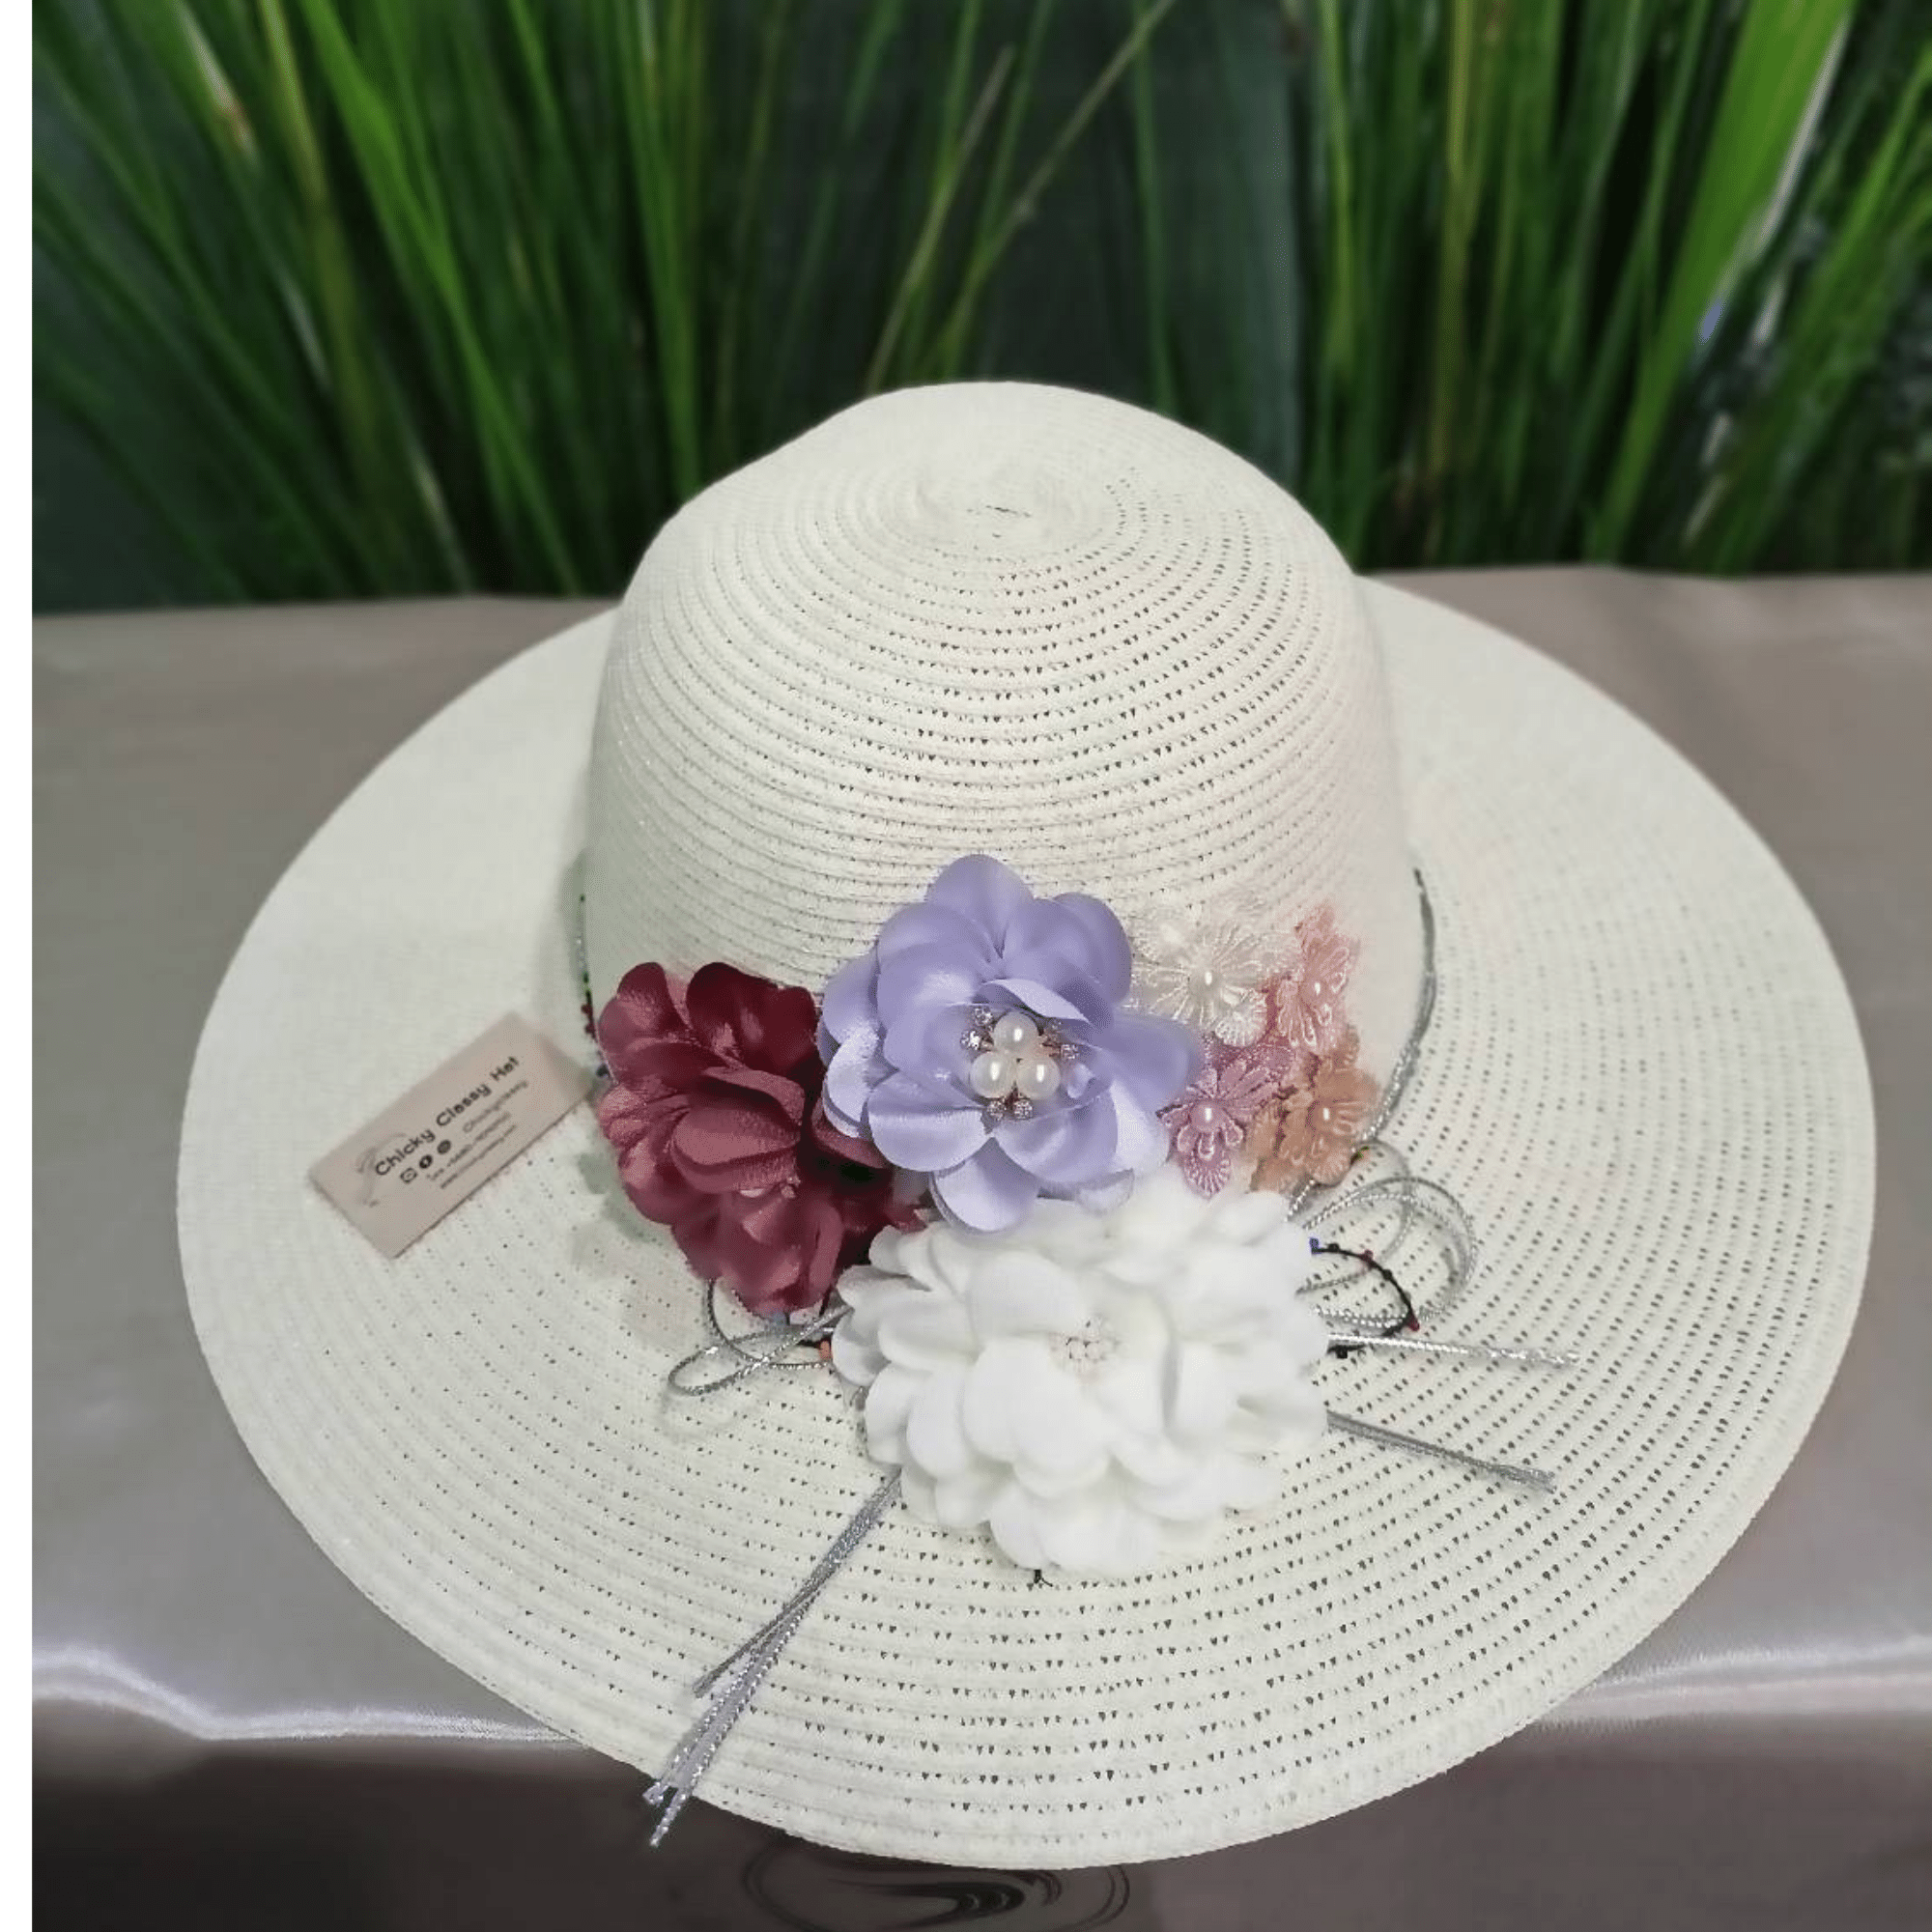 classic Straw hats medium size for wedding and beach